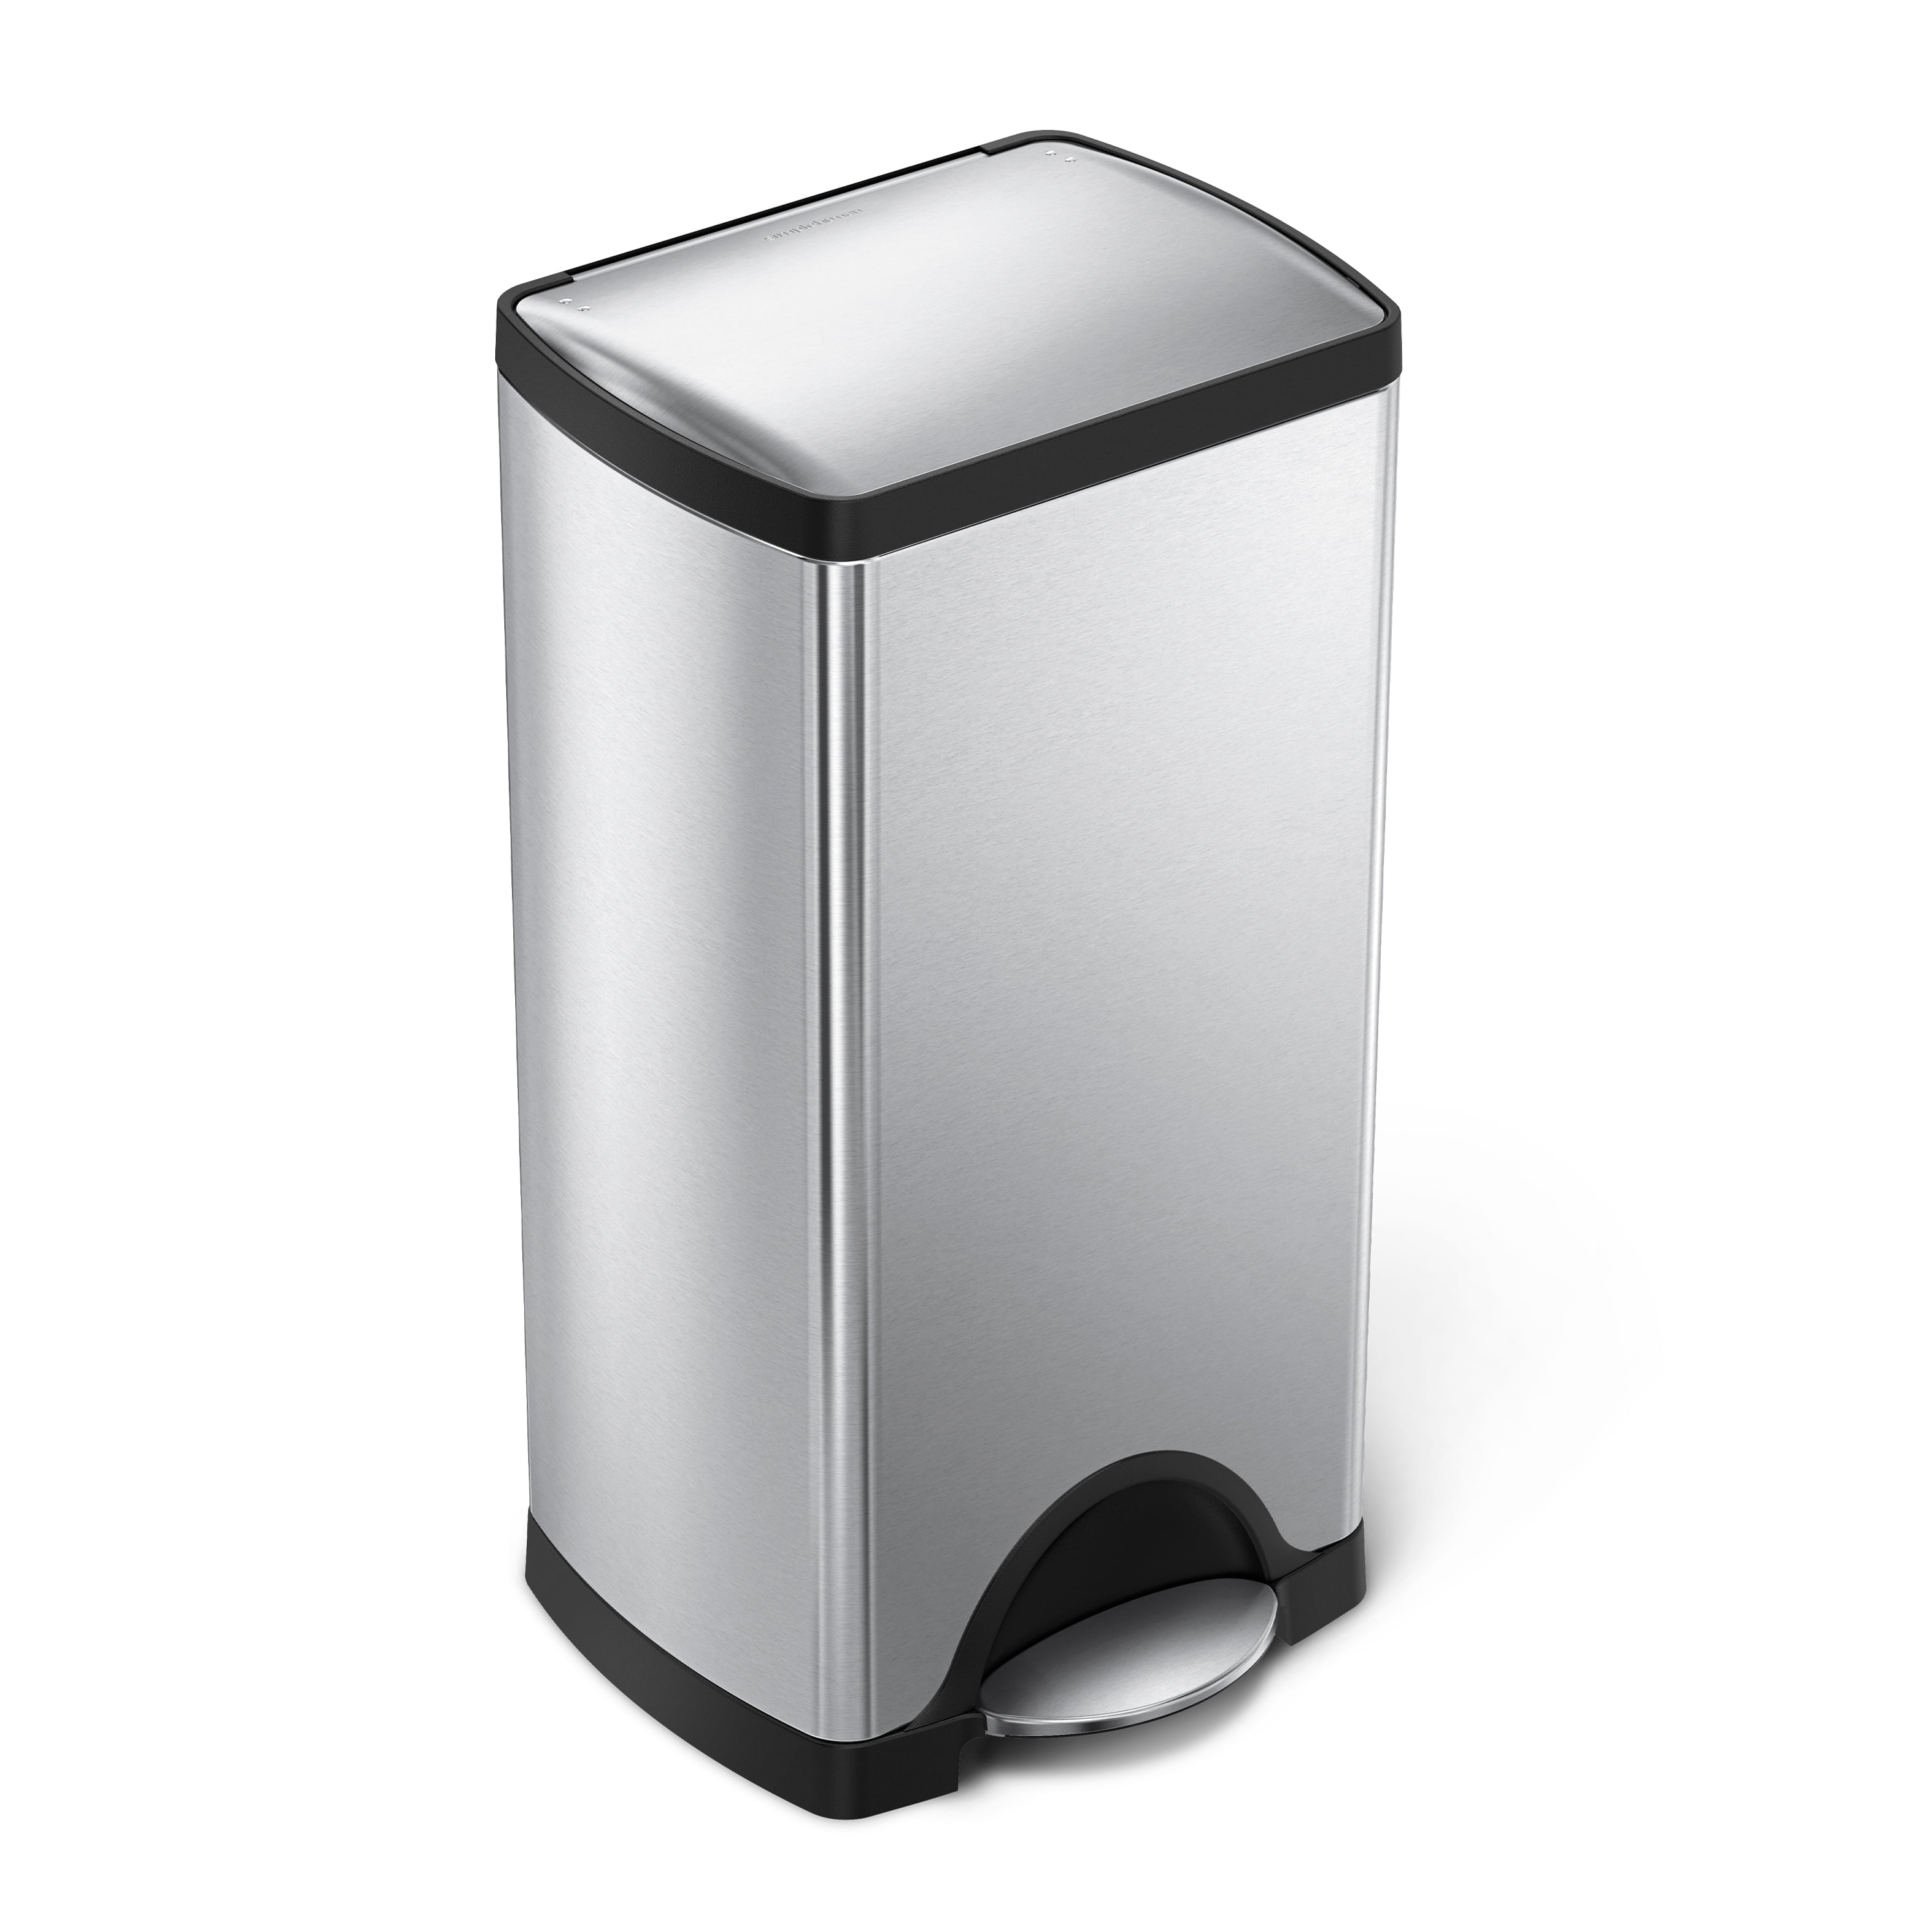 simplehuman 30 Liter 8 Gallon Stainless Steel Rectangular Kitchen Step Trash Can with Liner Pocket Brushed Stainless Steel